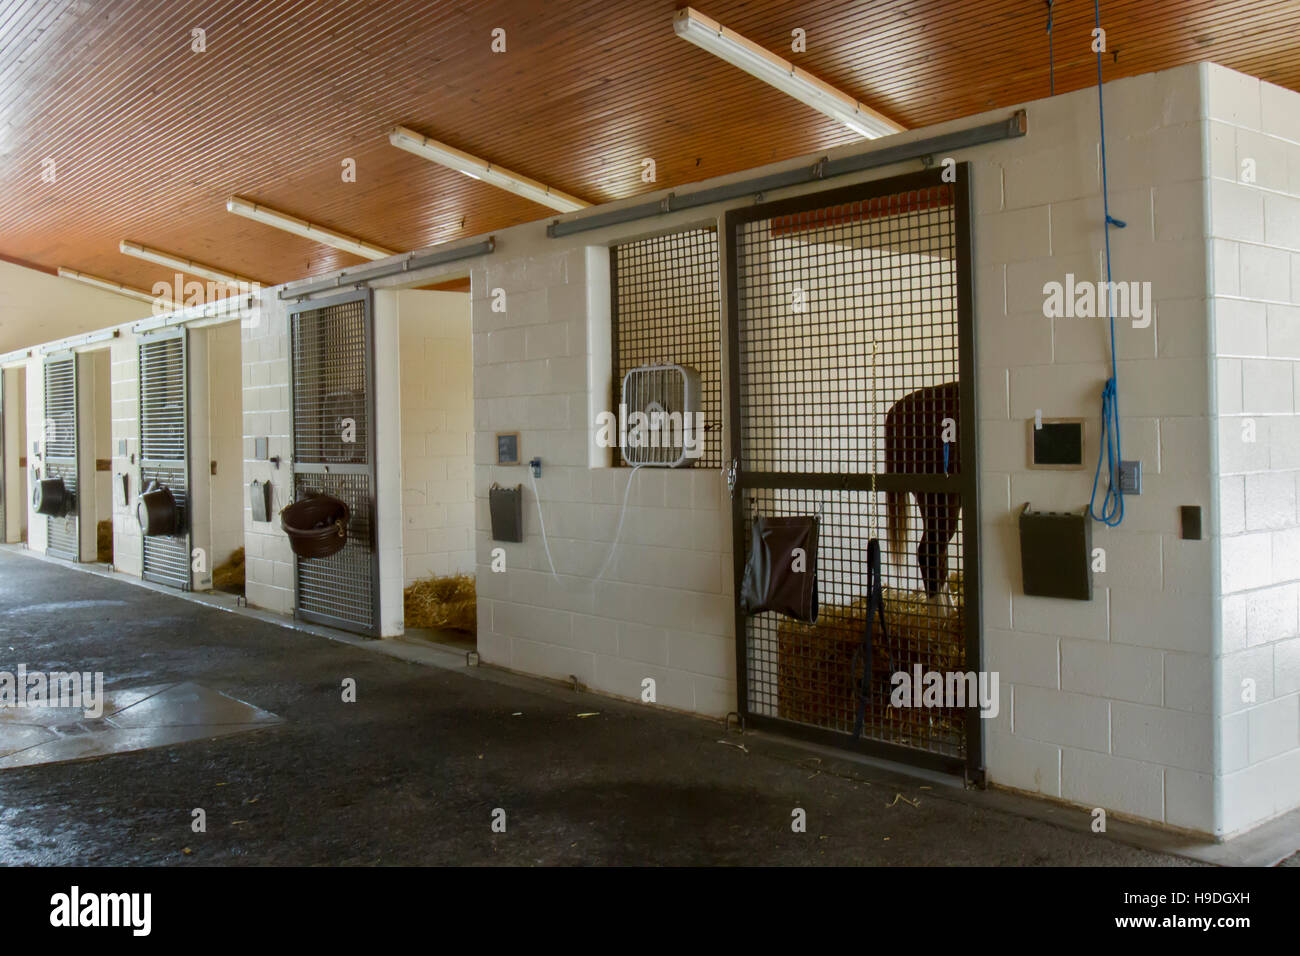 Horse standing in stall of equine hospital facility. Stock Photo